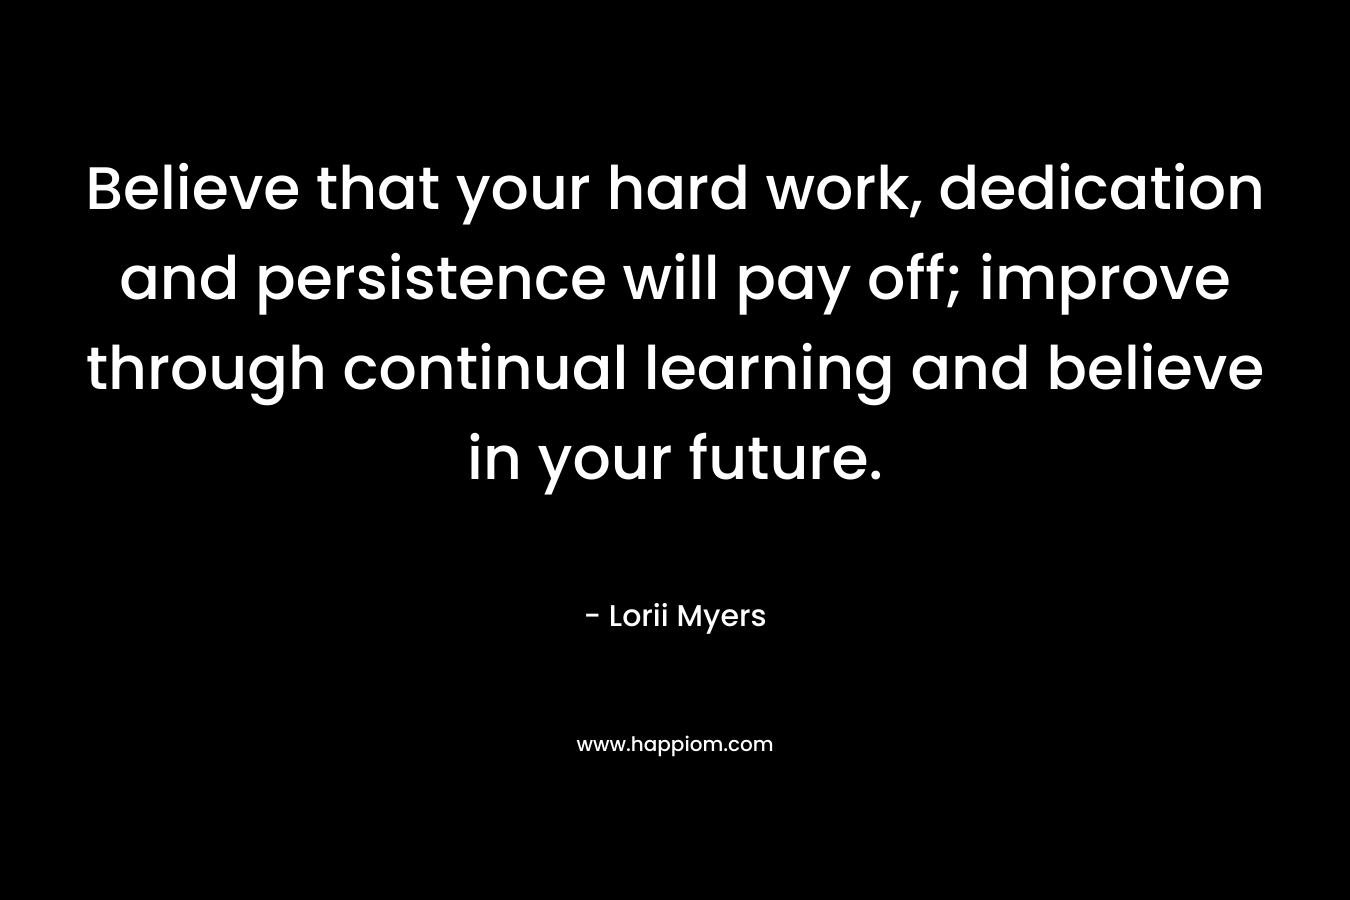 Believe that your hard work, dedication and persistence will pay off; improve through continual learning and believe in your future.